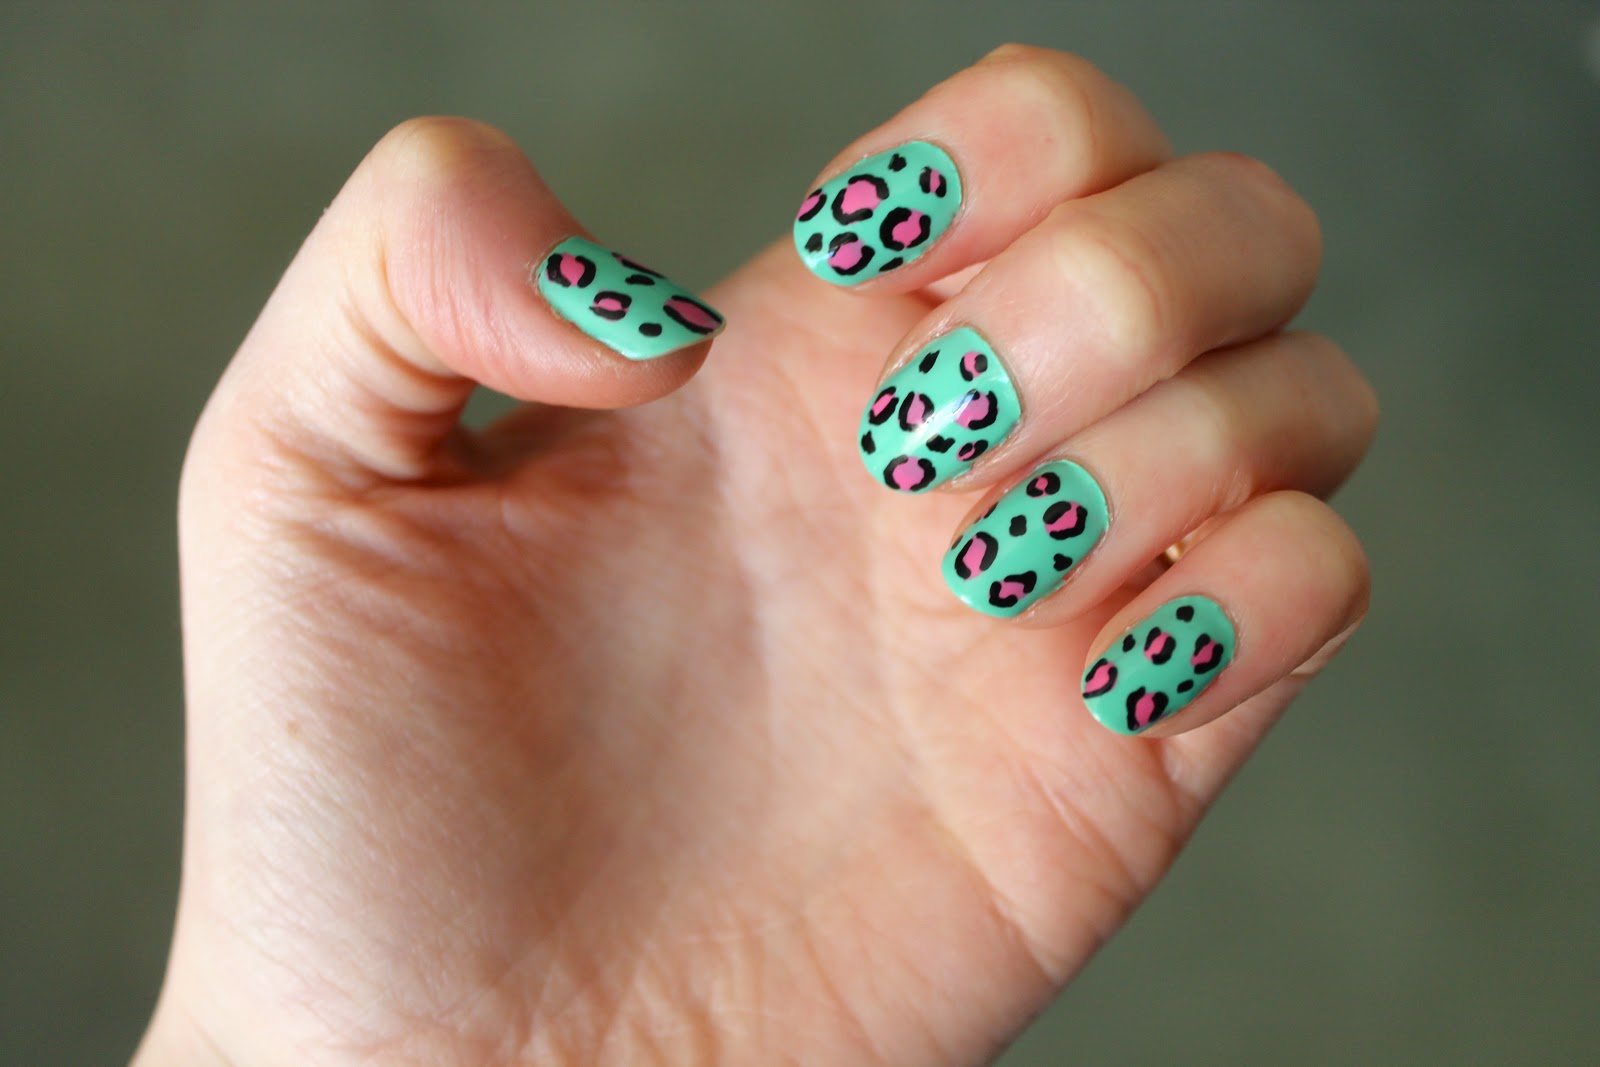 8. Exotic Animal Print Nail Art for a Wild Summer Look - wide 3